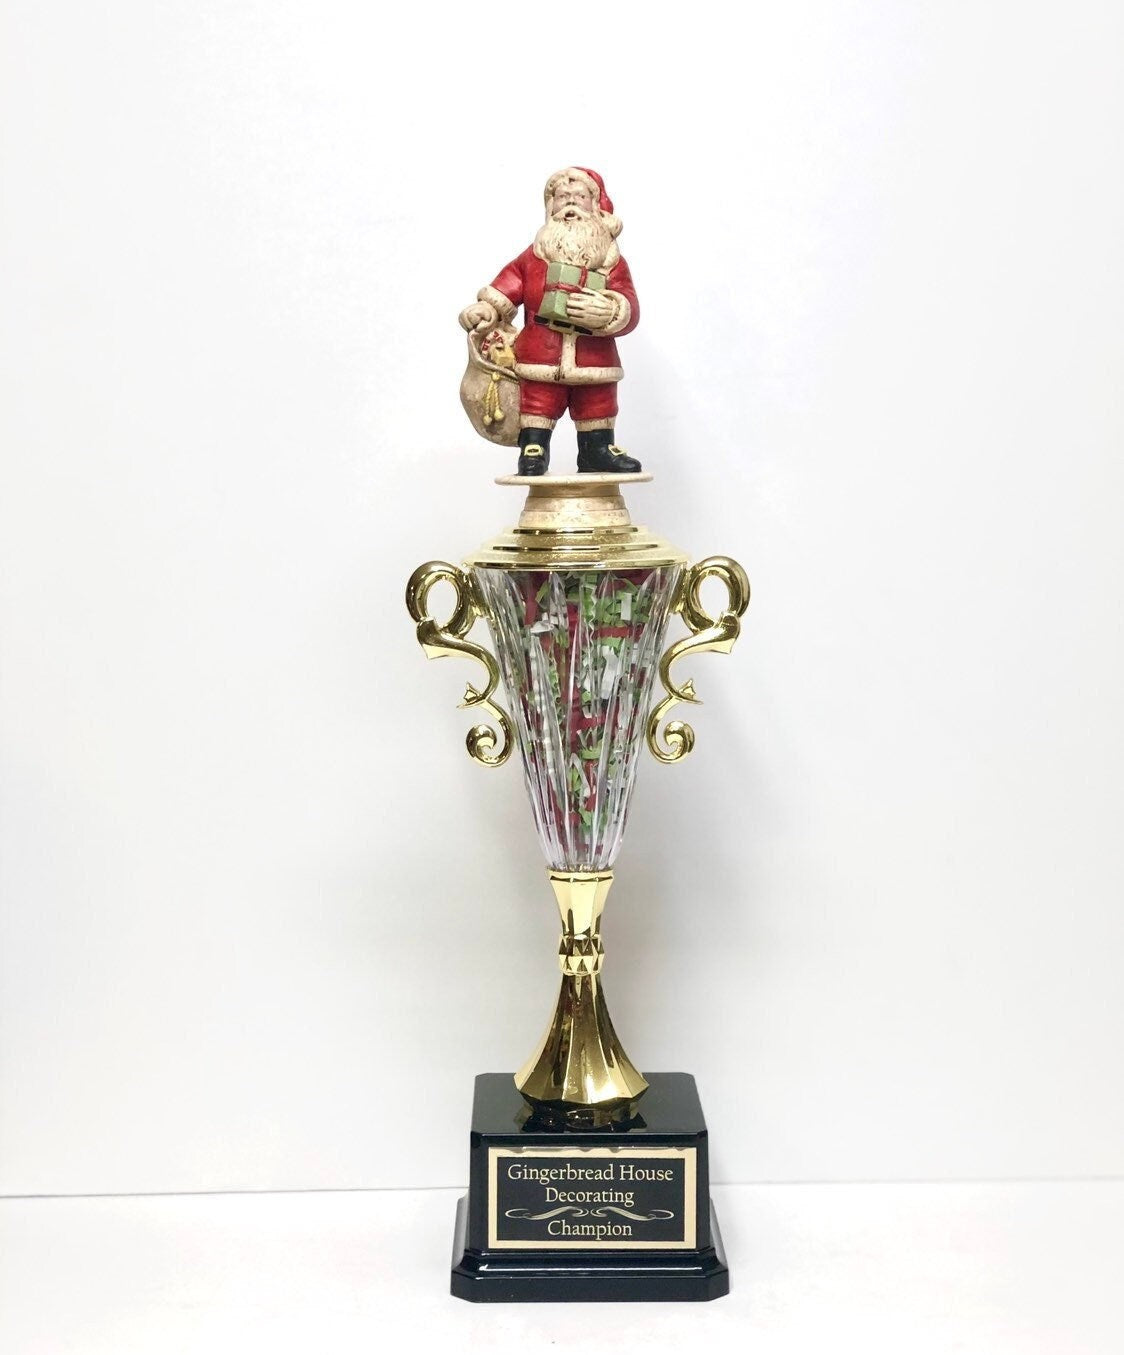 Family Christmas Trivia Night Trophy Gingerbread Decorating Cookie Bake Off Trophy Ugly Sweater Contest Trophy Santa Christmas Decor